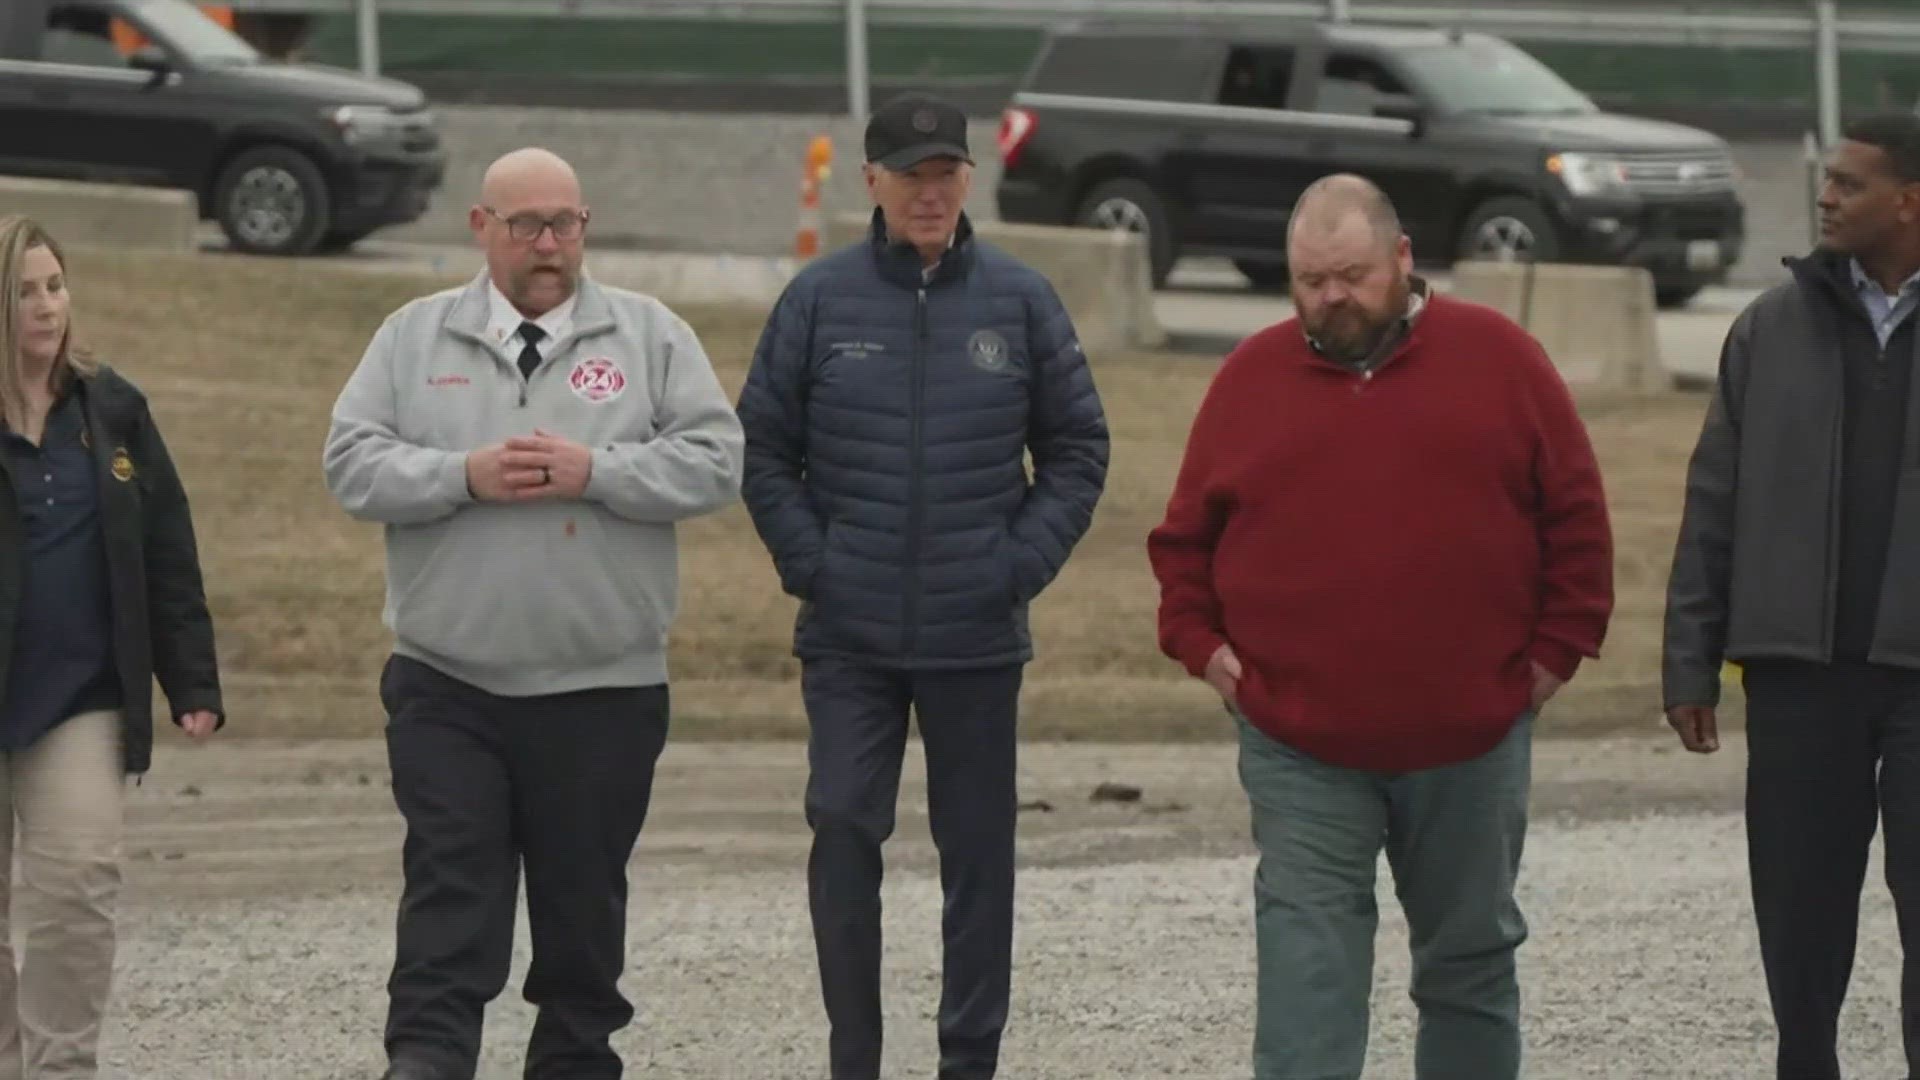 The East Palestine community marked one year since the toxic Ohio train derailment on Feb. 3.